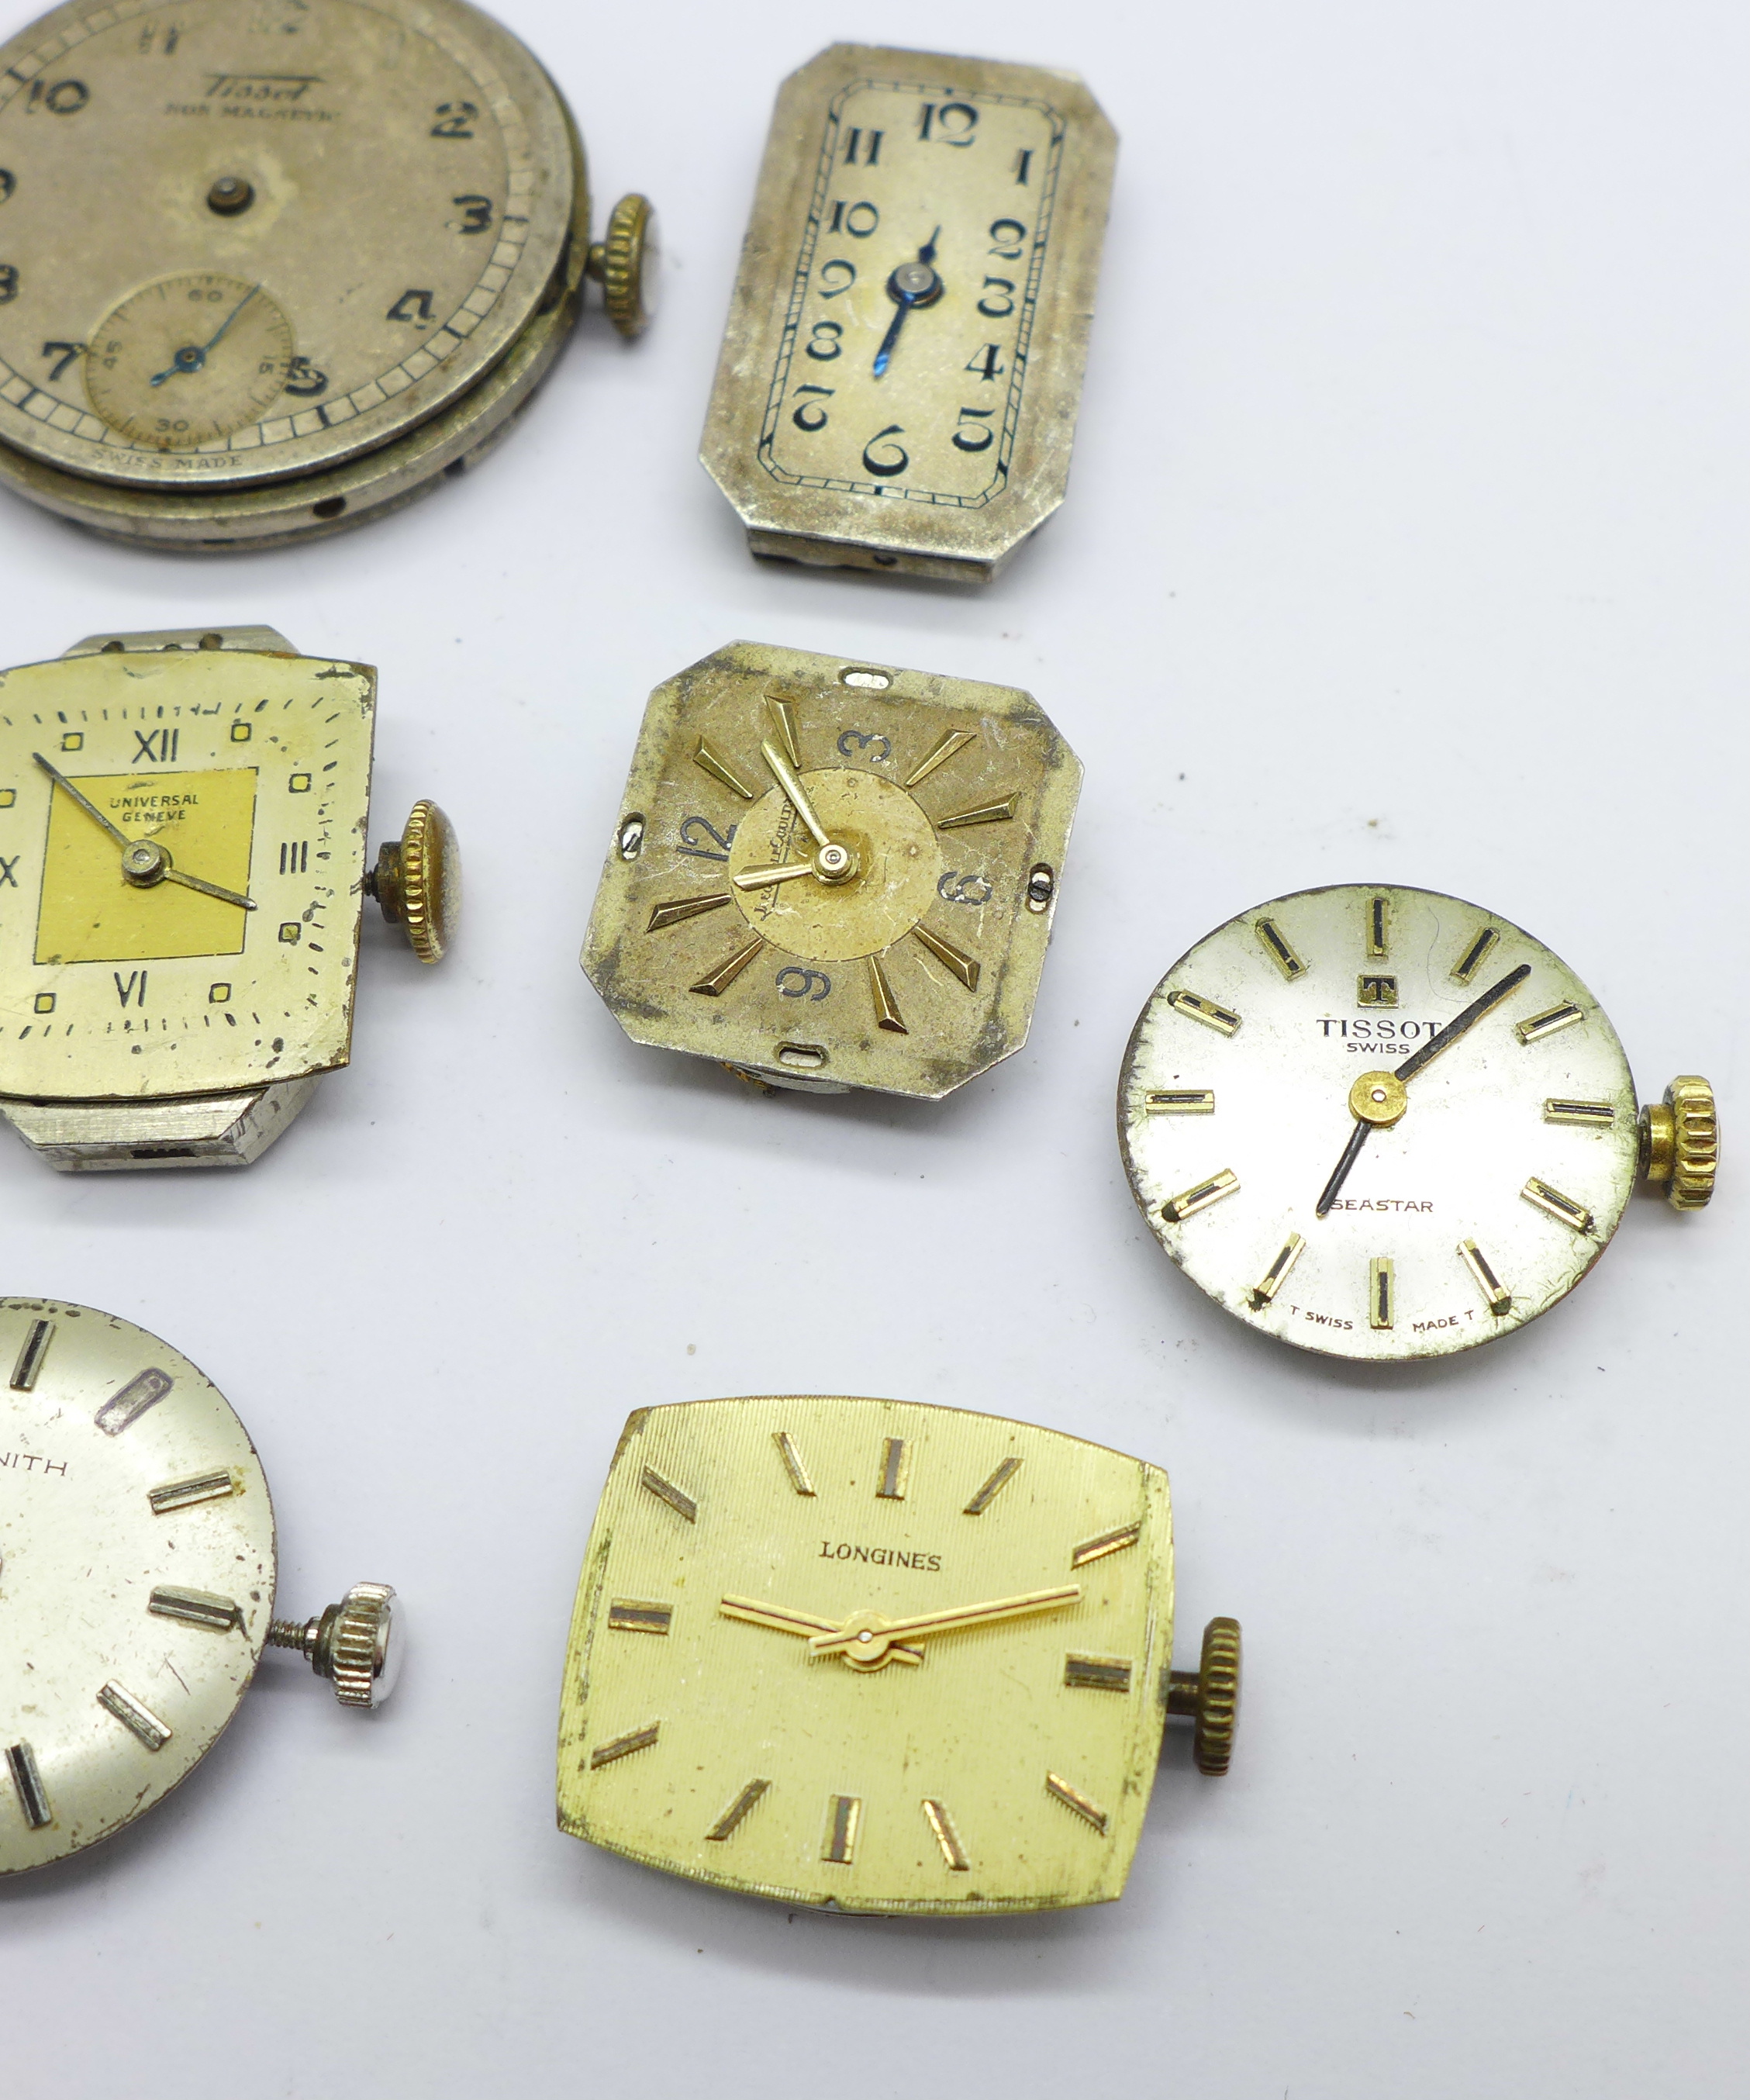 Lady's and gentleman's wristwatch movements including Omega, Universal, Jaeger-LeCoultre, Longines - Image 4 of 8